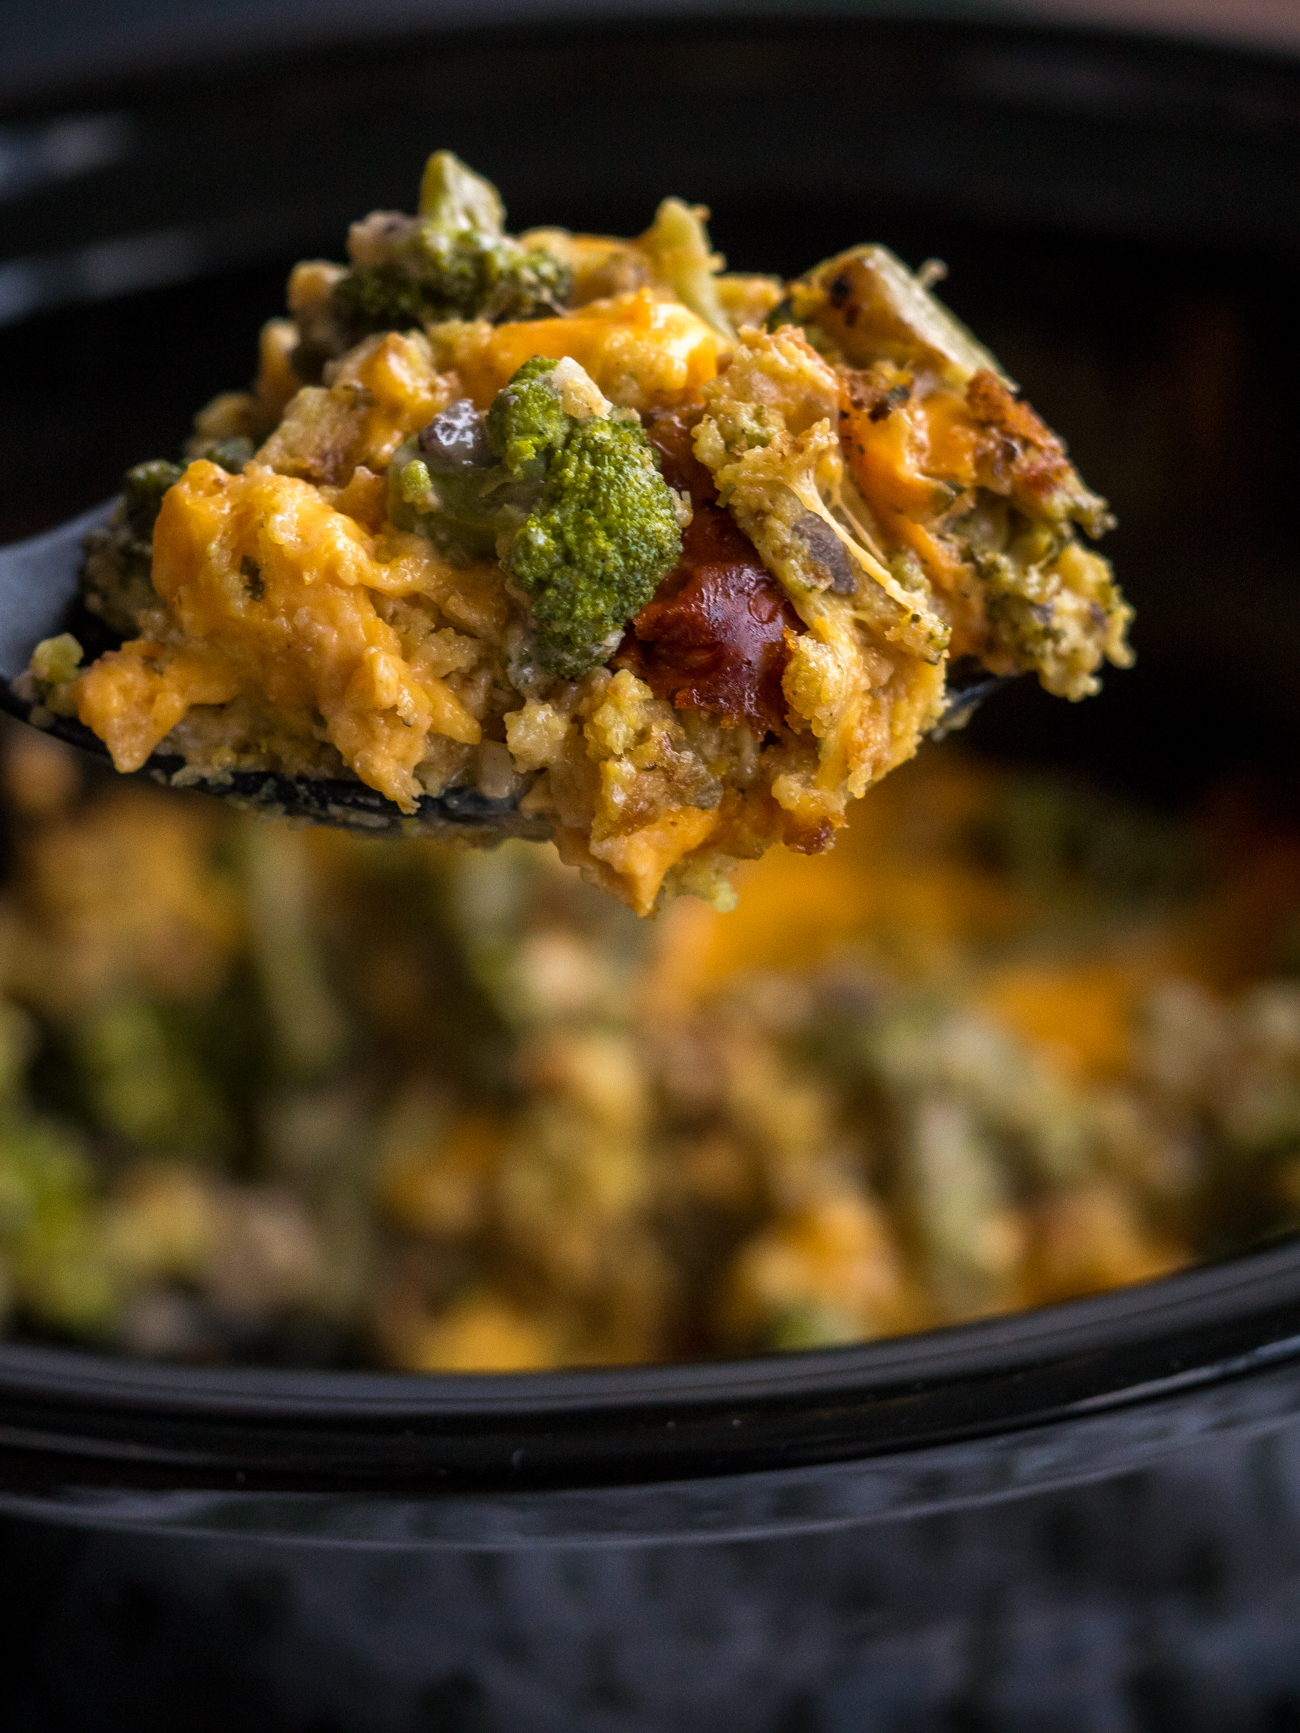 Crockpot Broccoli Casserole with Stuffing - The Vintage Cook